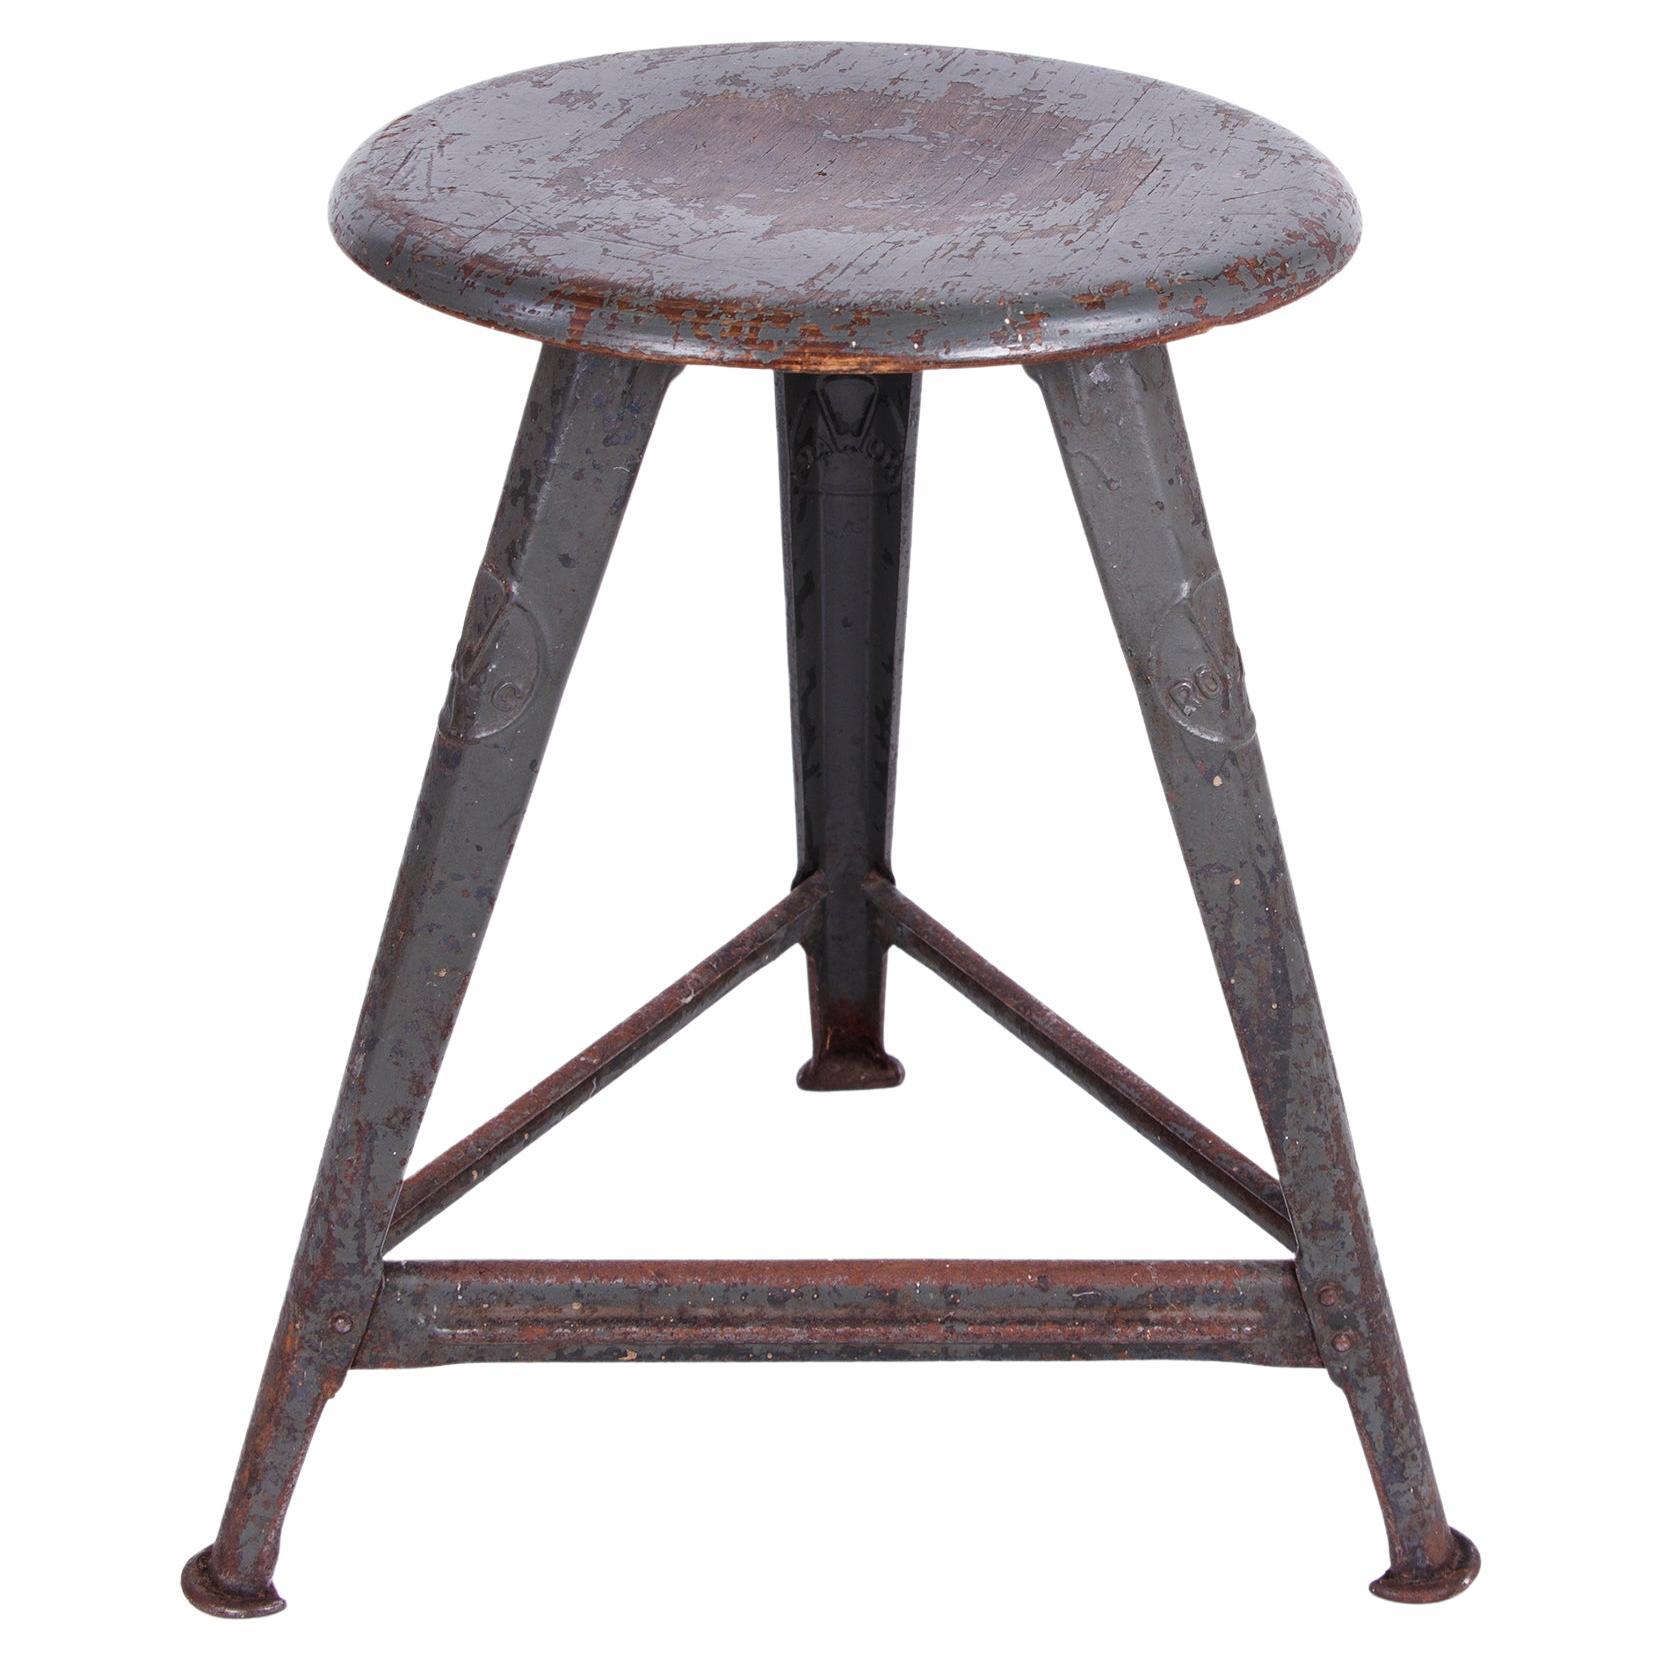 Industrial Factory Bauhaus Stool by Rowac / Robert Wagner Germany, 1910-1920s For Sale